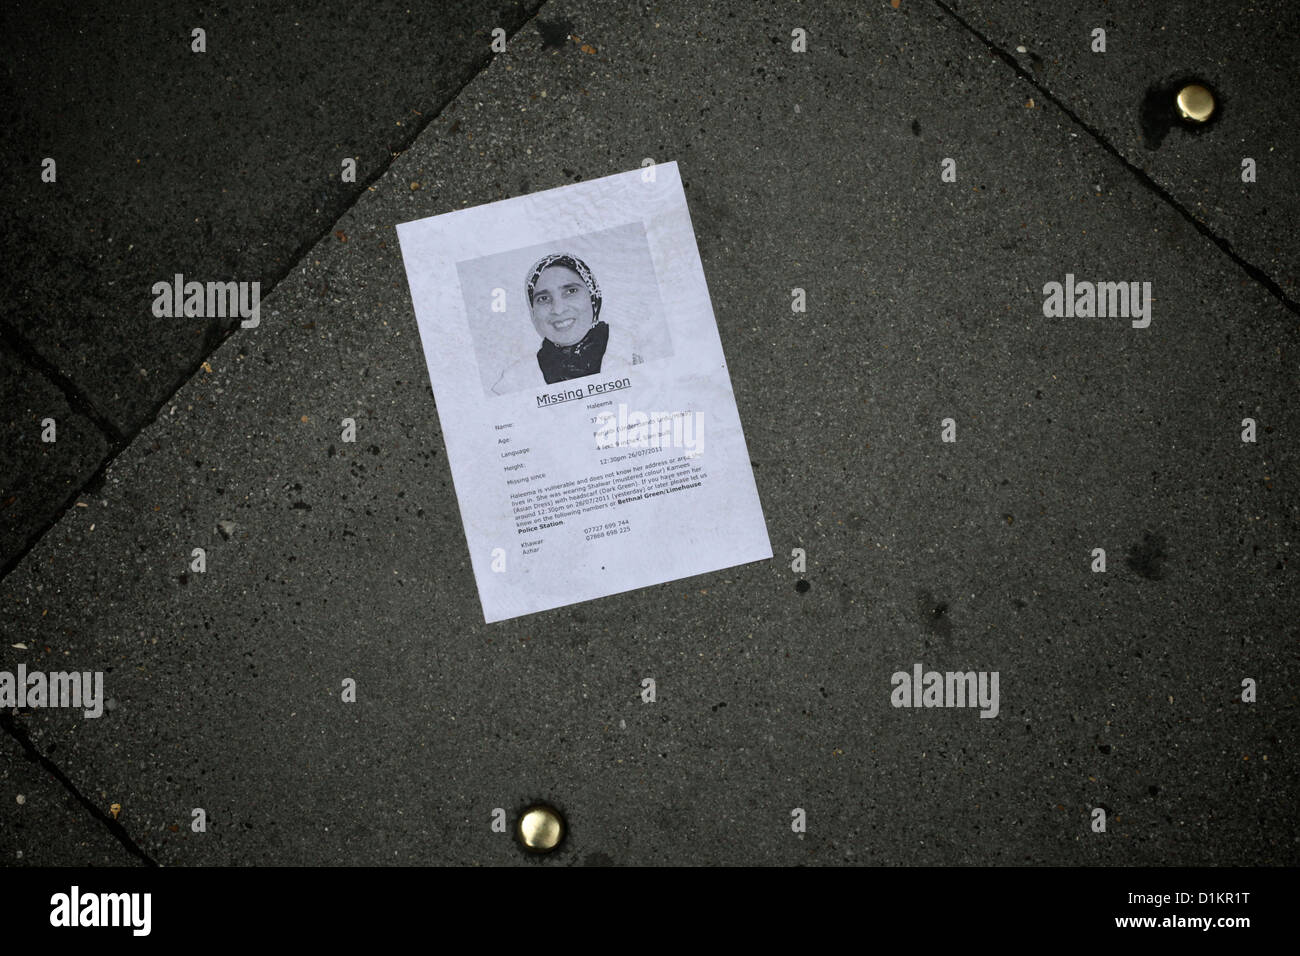 A dropped leaflet for a missing person, Shepherd's Bush, London, UK Stock Photo